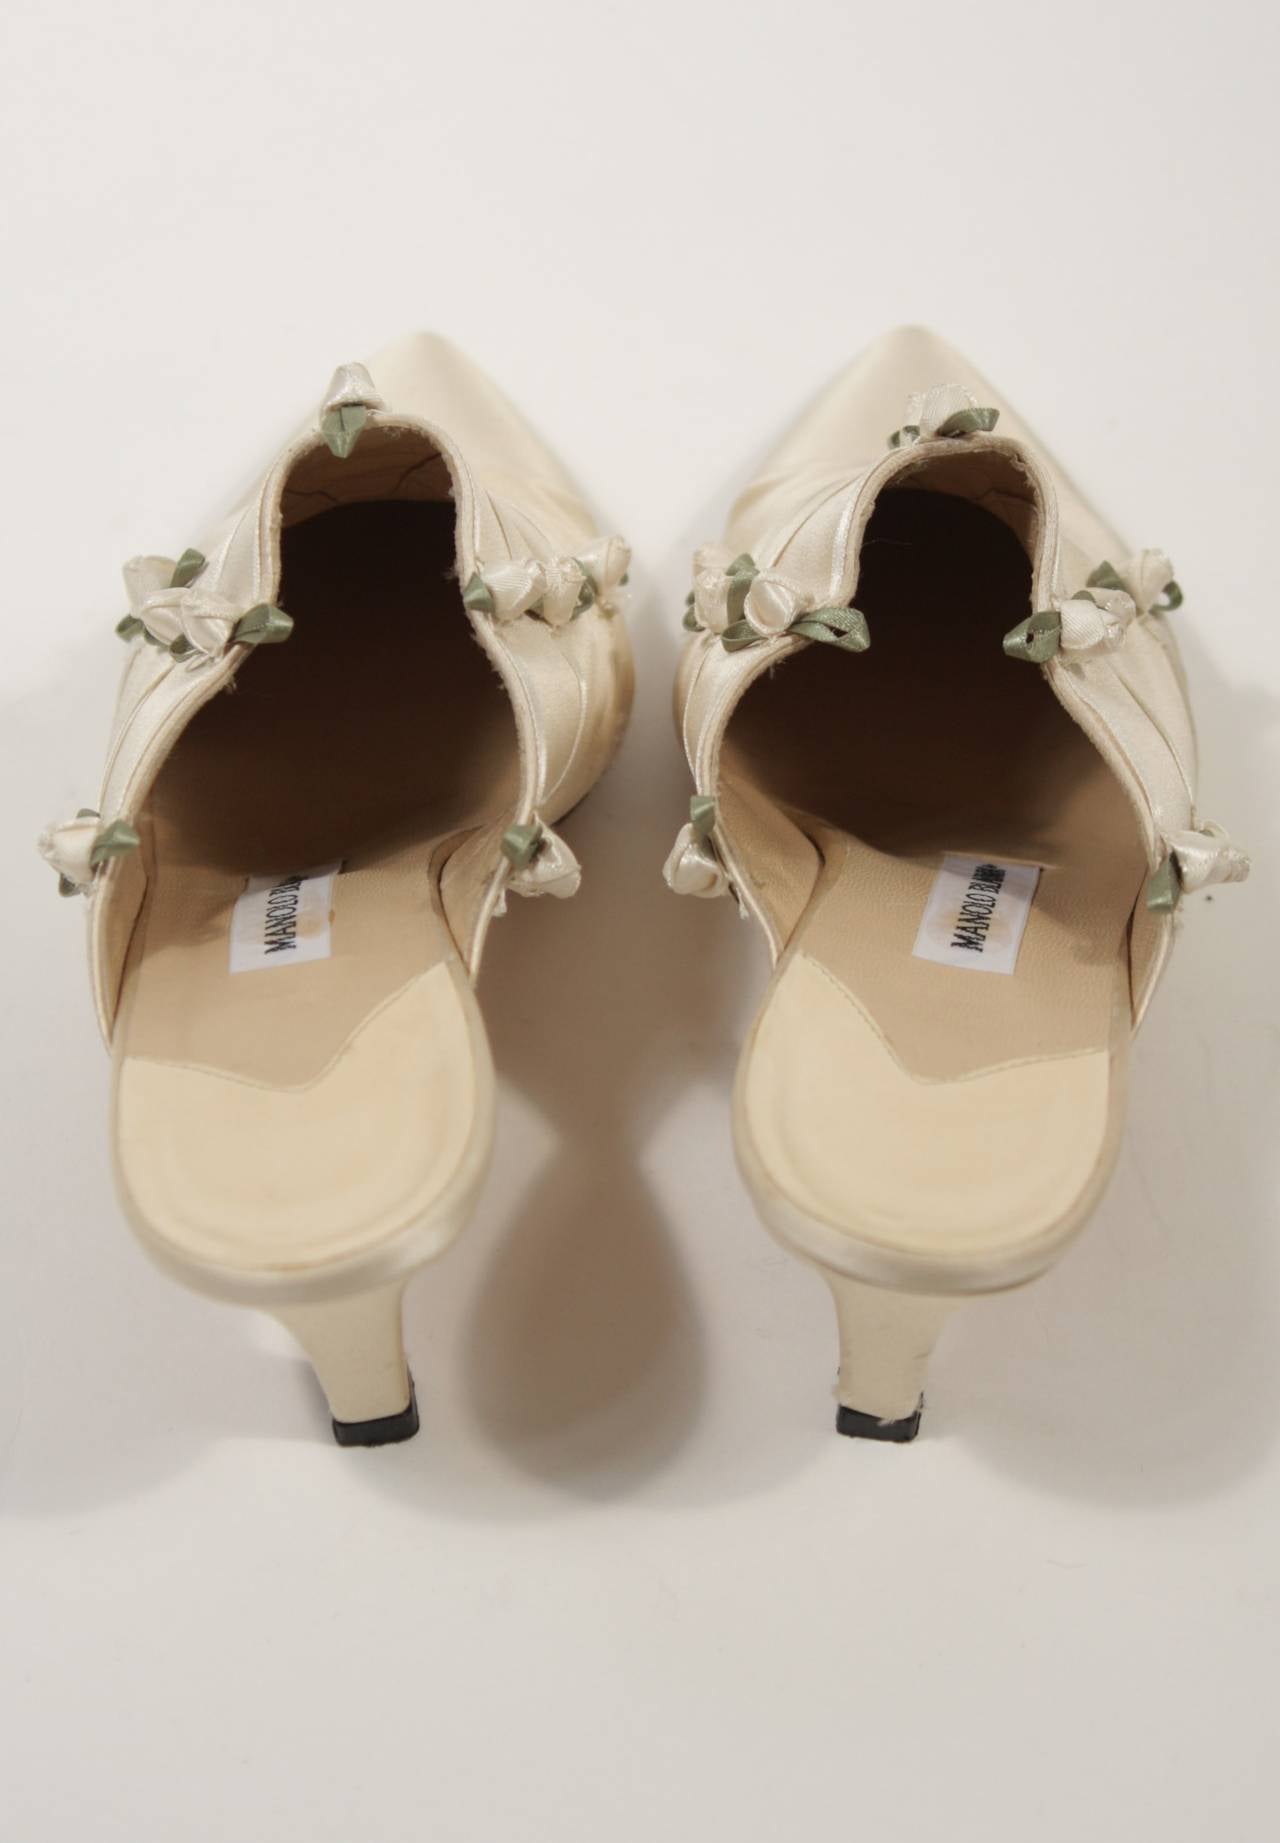 Women's Manolo Blahnik Ivory Silk Bridal Shoe with Floral Accents Size 7